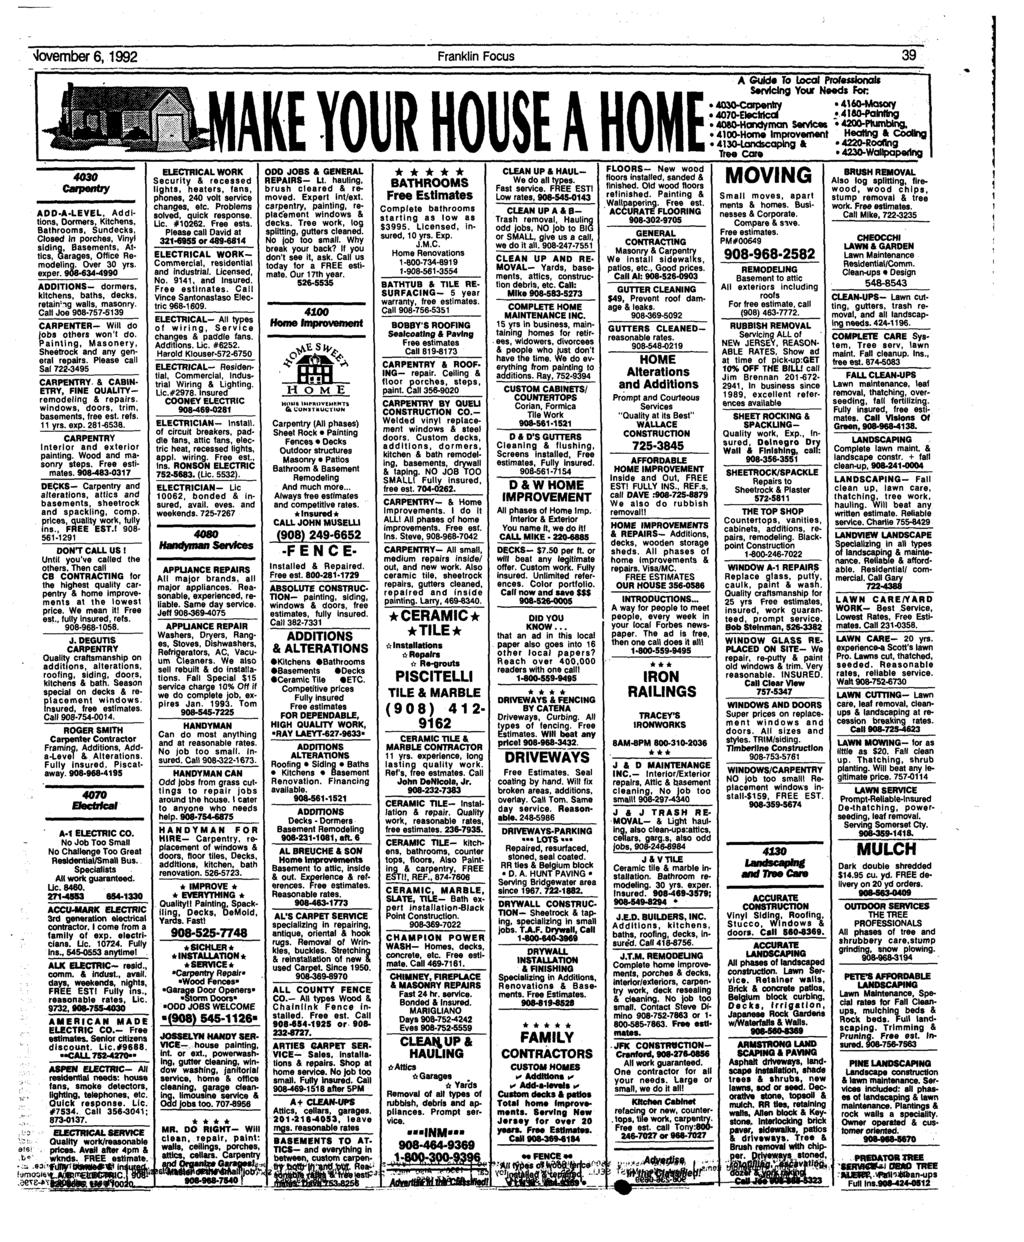 vlovember 6,1992 Franklin Focus 39 4030 Carpentry ADD-A-LEVEL, Additions, Dormers, Kitchens, Bathrooms, Sundecks, Closed in porches, Vinyl siding, Basements, Attics, Garages, Office Remodeling.